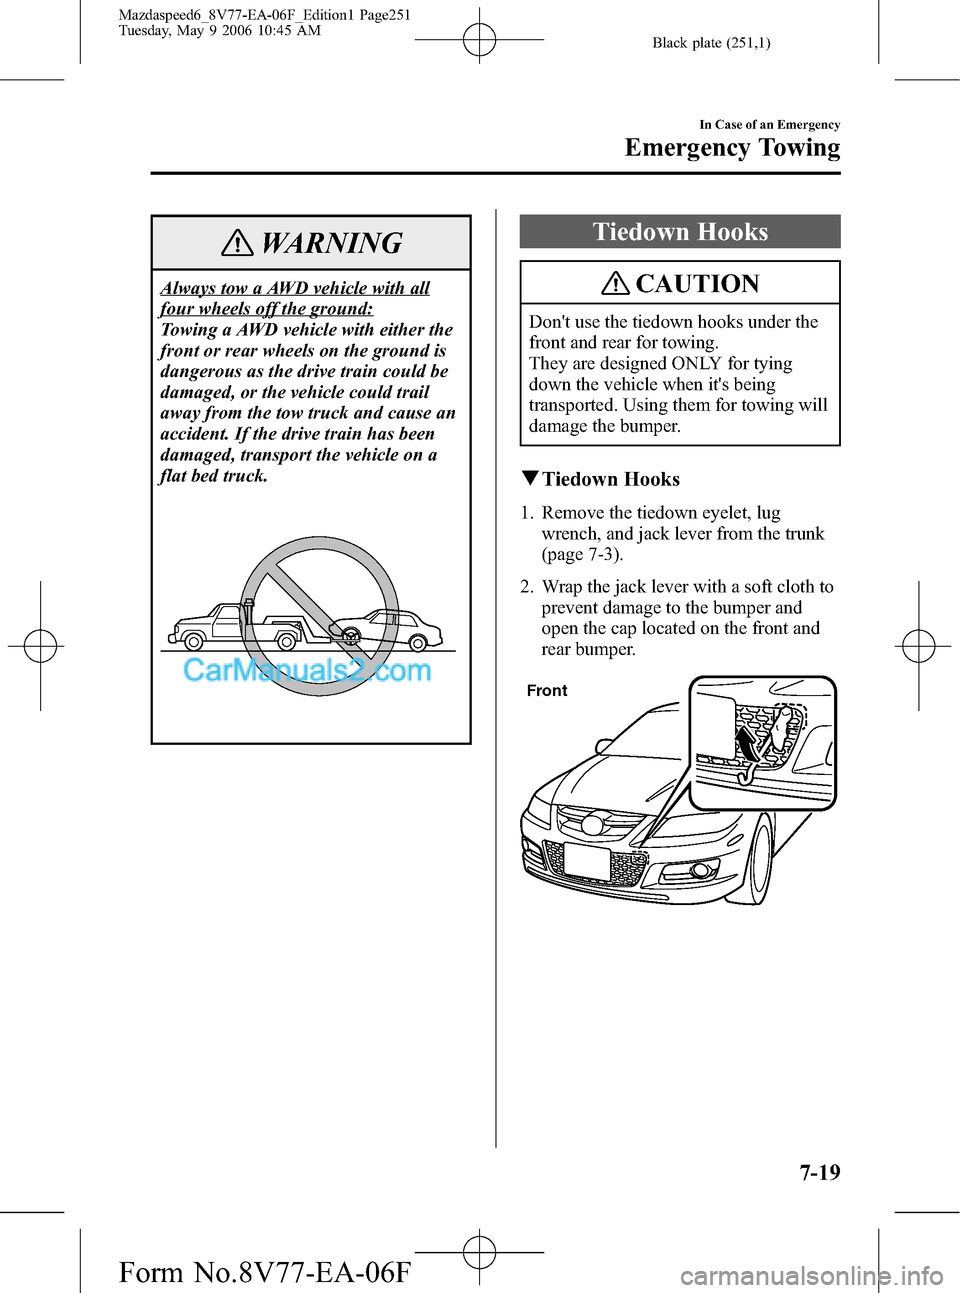 MAZDA MODEL MAZDASPEED 6 2007  Owners Manual (in English) Black plate (251,1)
WARNING
Always tow a AWD vehicle with all
four wheels off the ground:
Towing a AWD vehicle with either the
front or rear wheels on the ground is
dangerous as the drive train could 